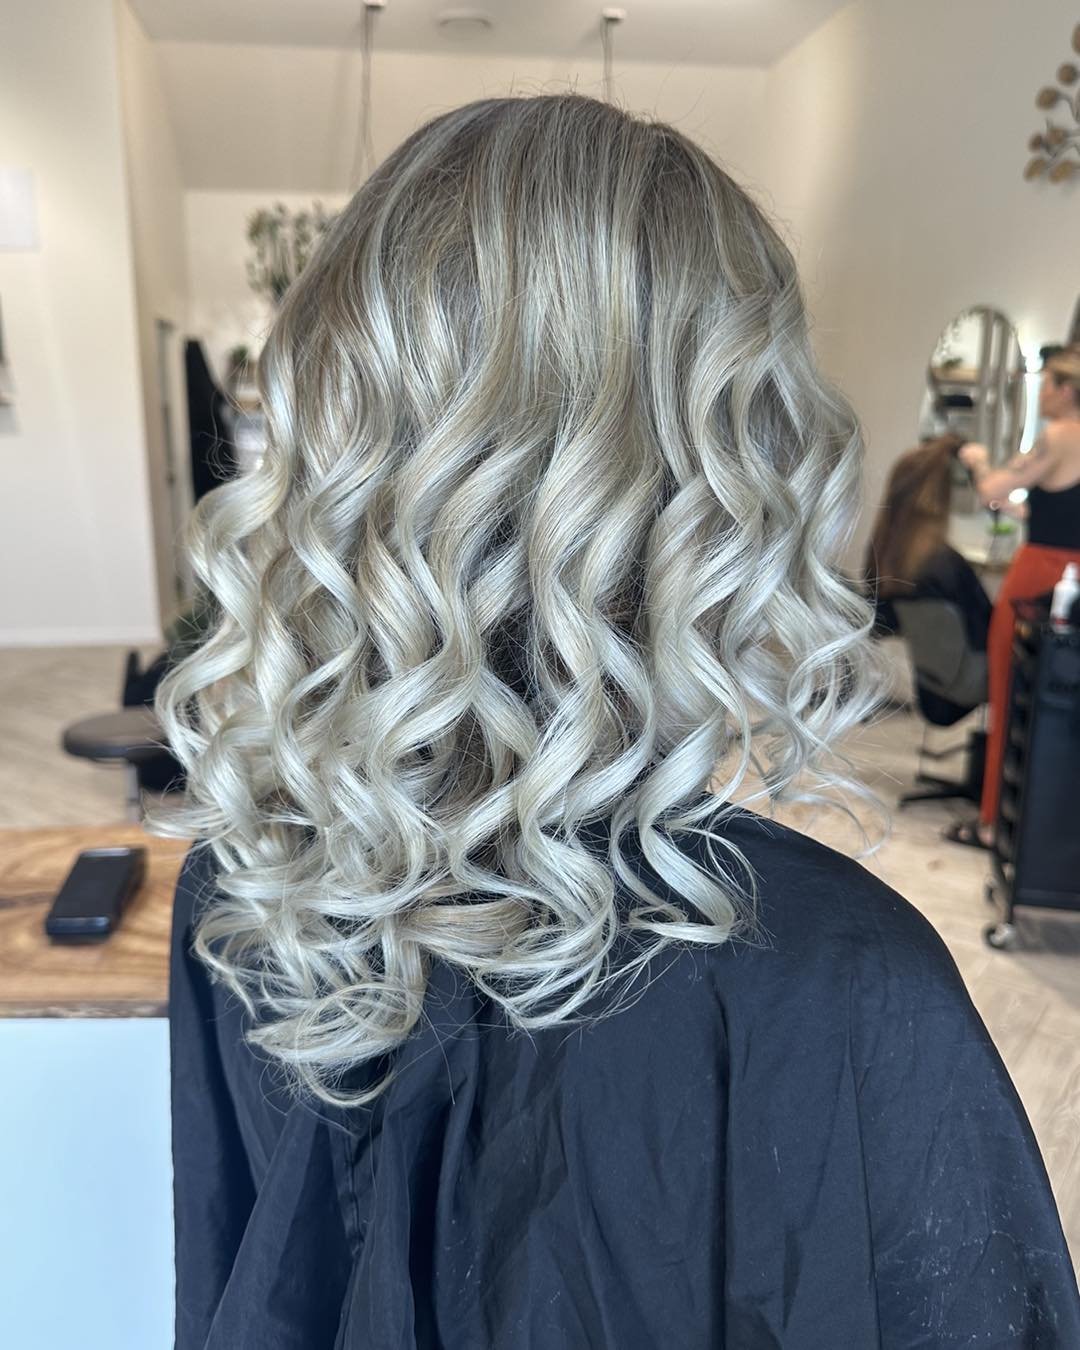 From dark to light! Achieved by applying baby lights mixed with slices with a blended root for easier maintenance. ✨✨✨ swipe ➡️➡️ for the before. ✨✨ created by Kirsty. 

#babylights #curls #blonde #creative #balayage #pure